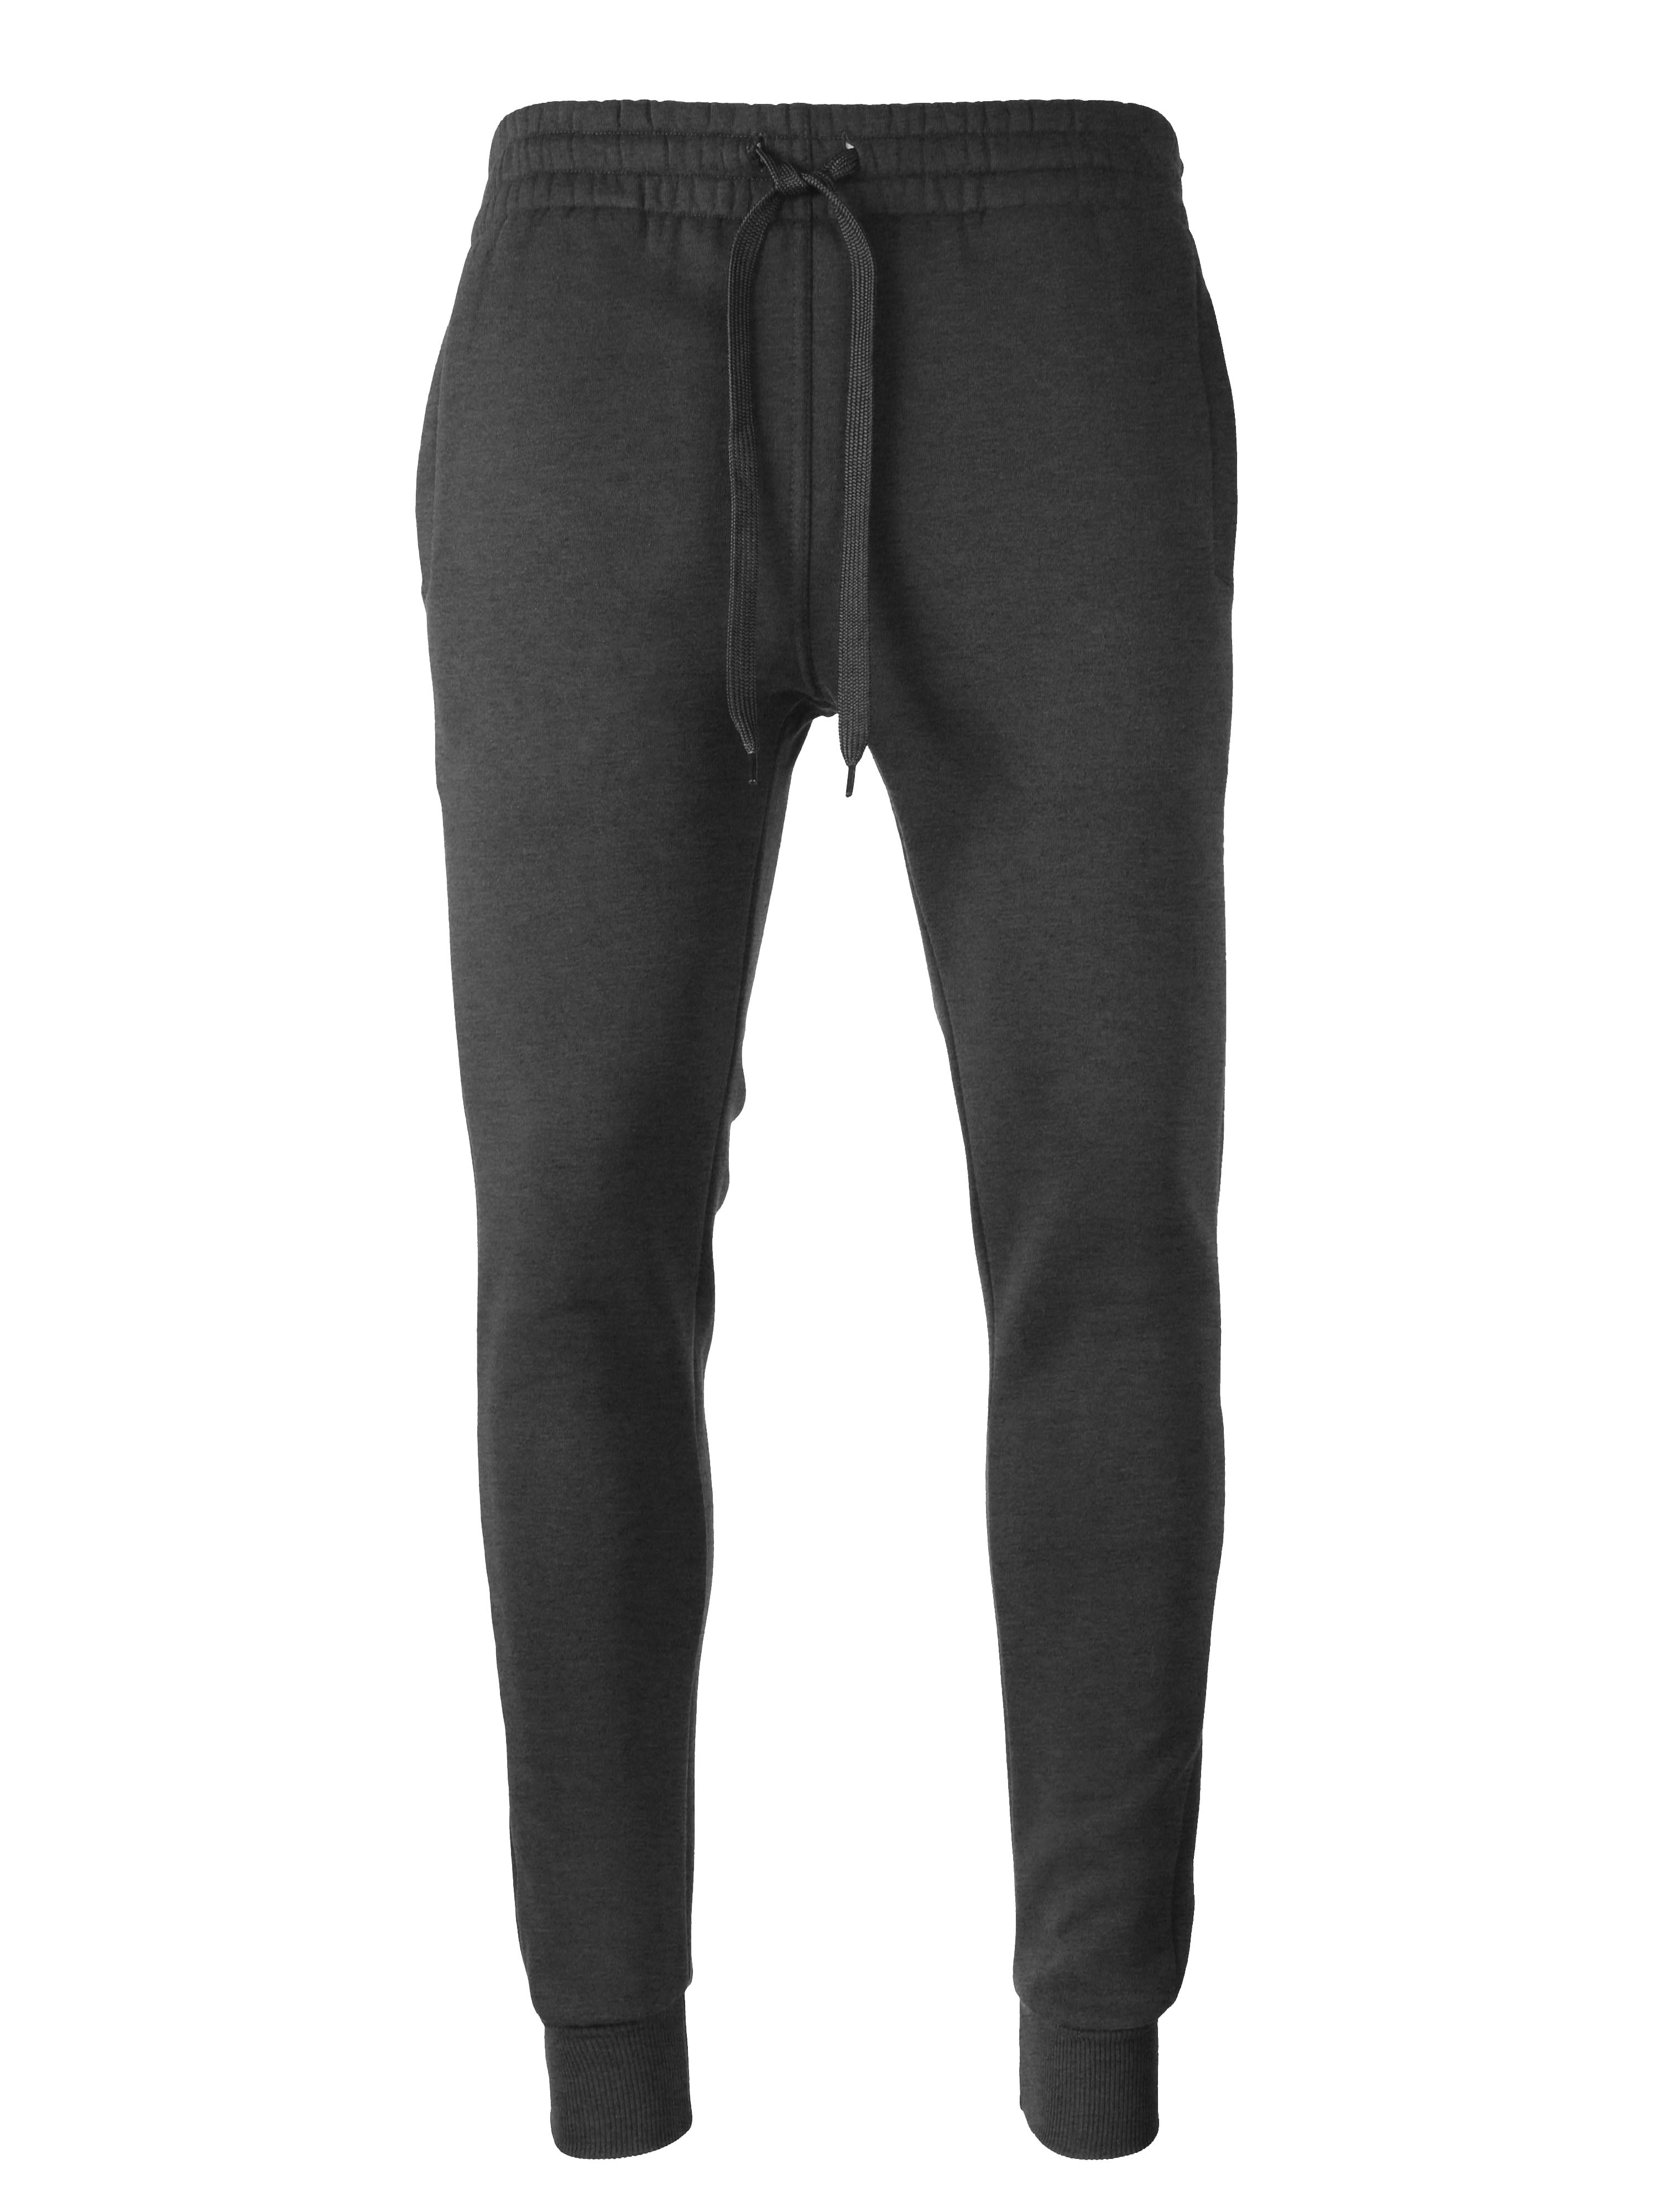 Hat and Beyond Men's Lightweight Soft Fleece-Lined Sweatpants for ...